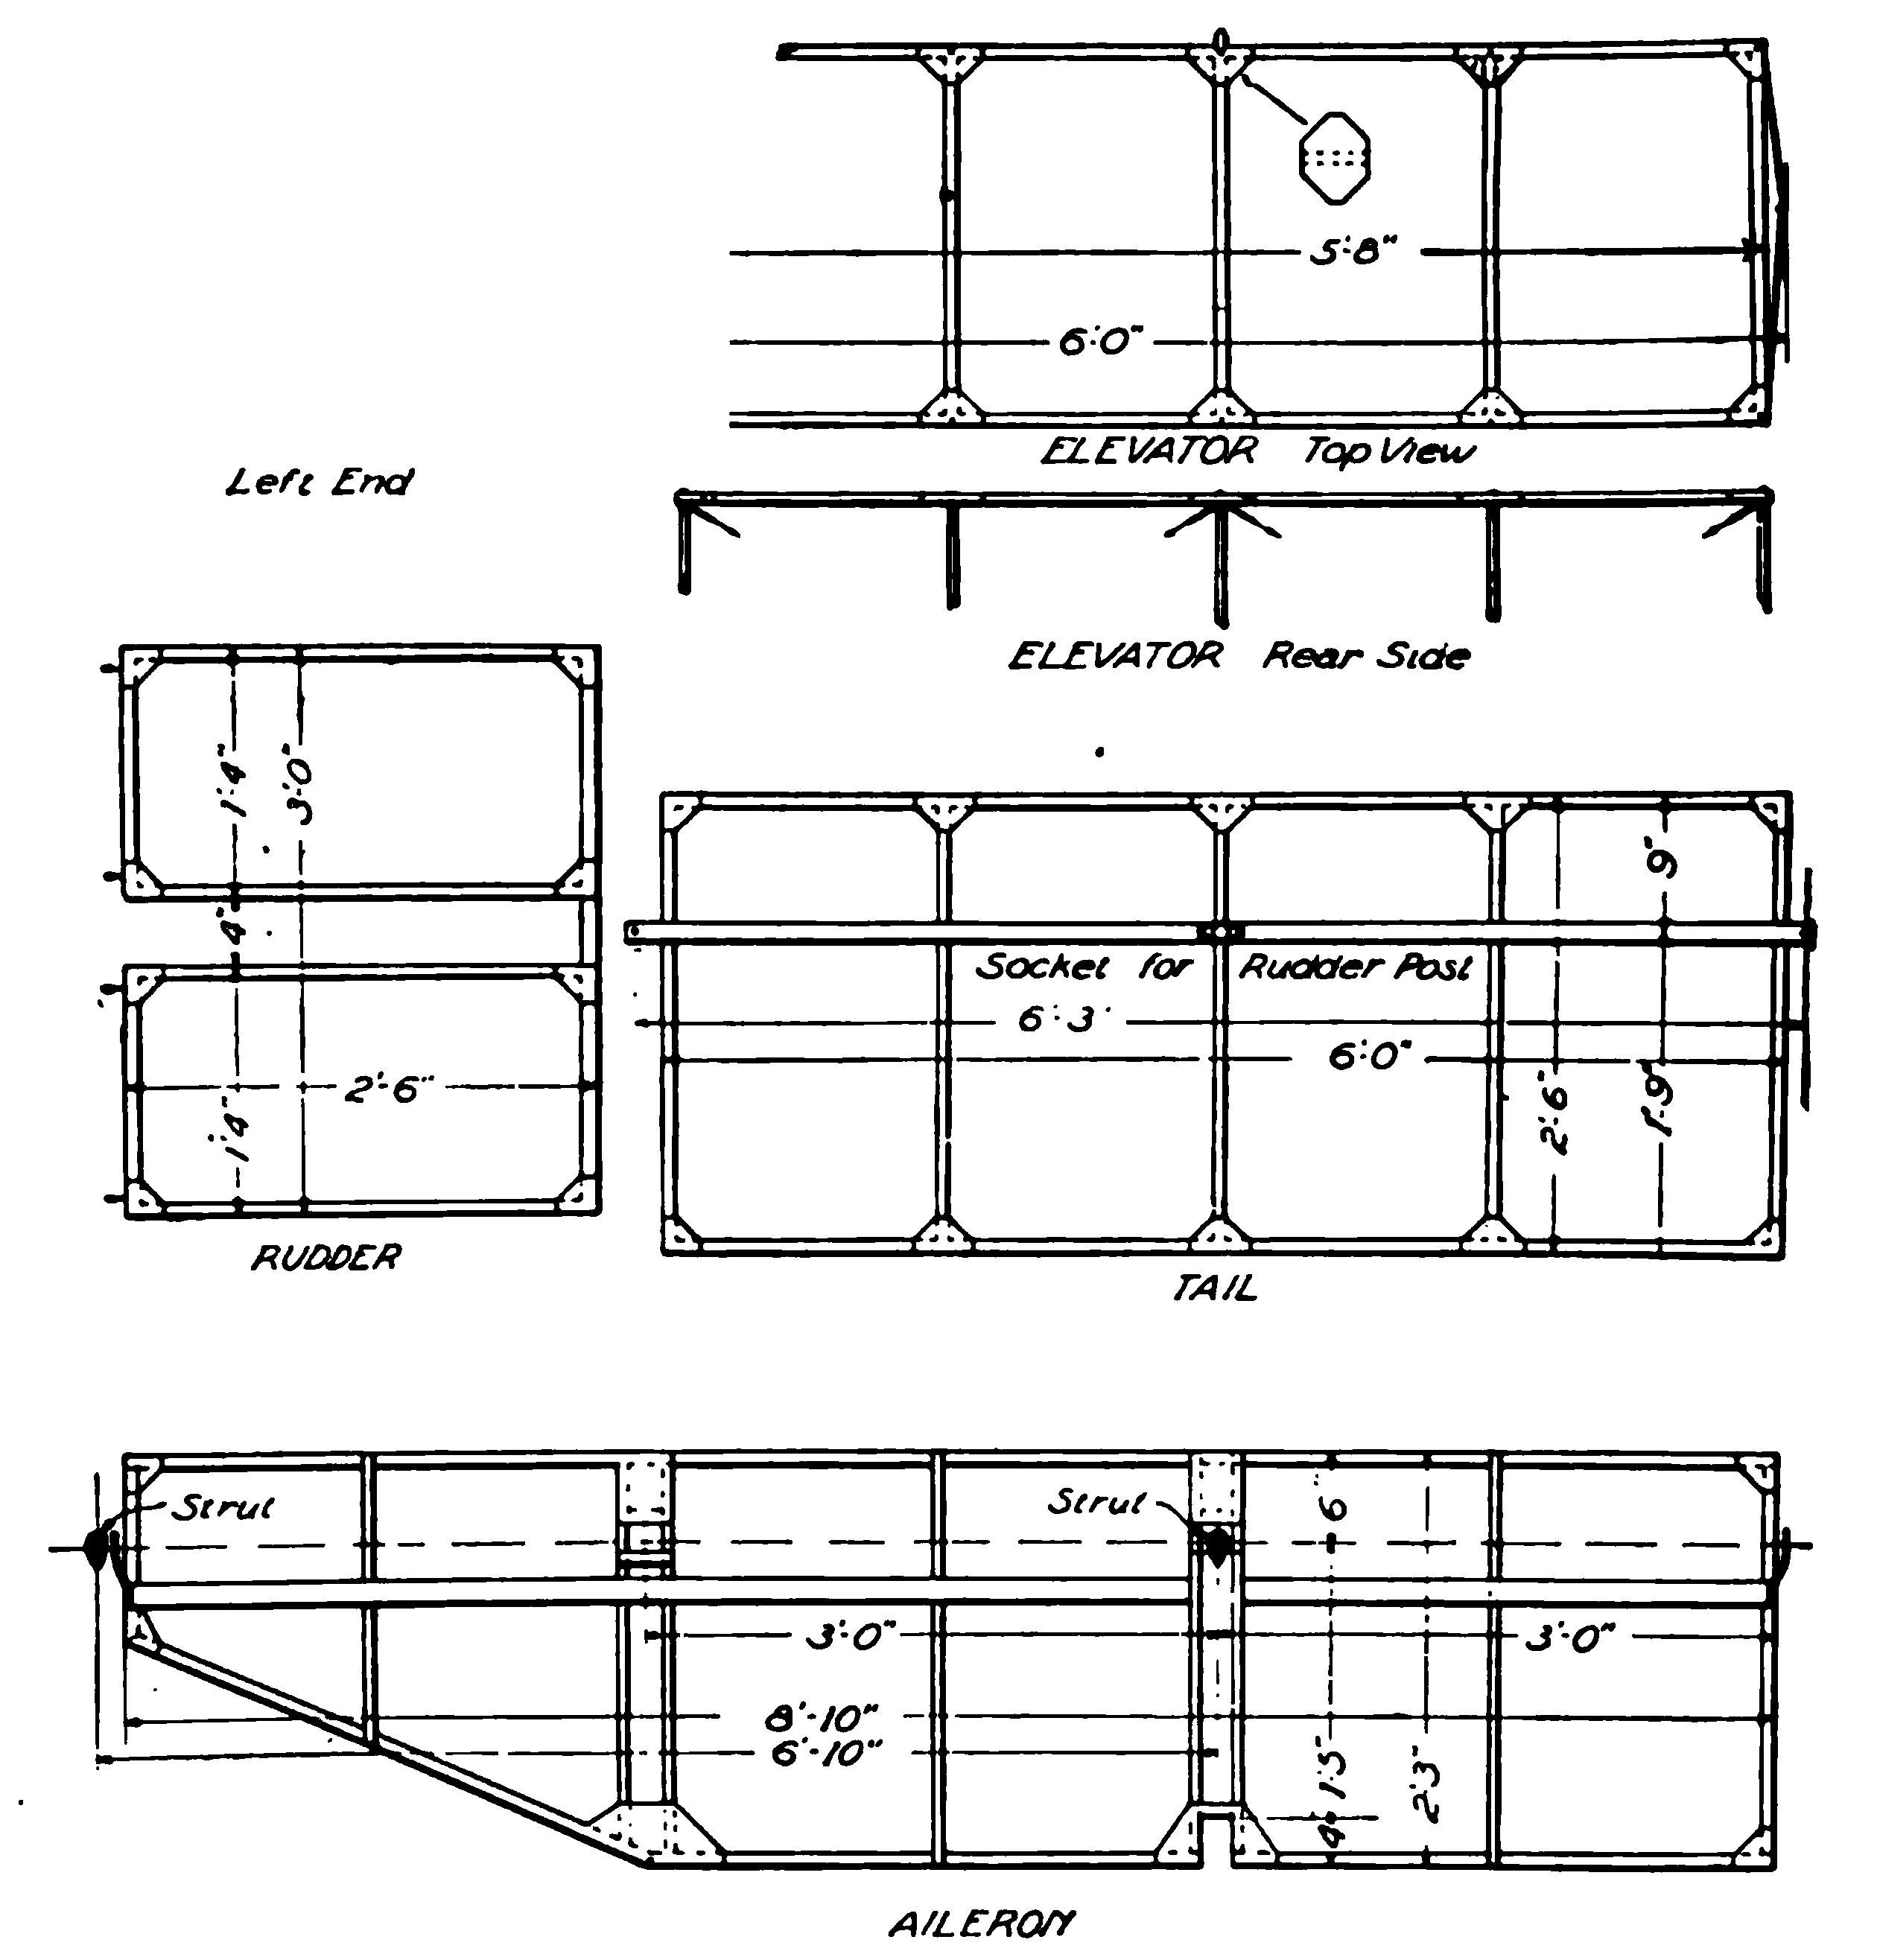 Fig. 18. Details of Rudders and Ailerons, Curtiss Biplane